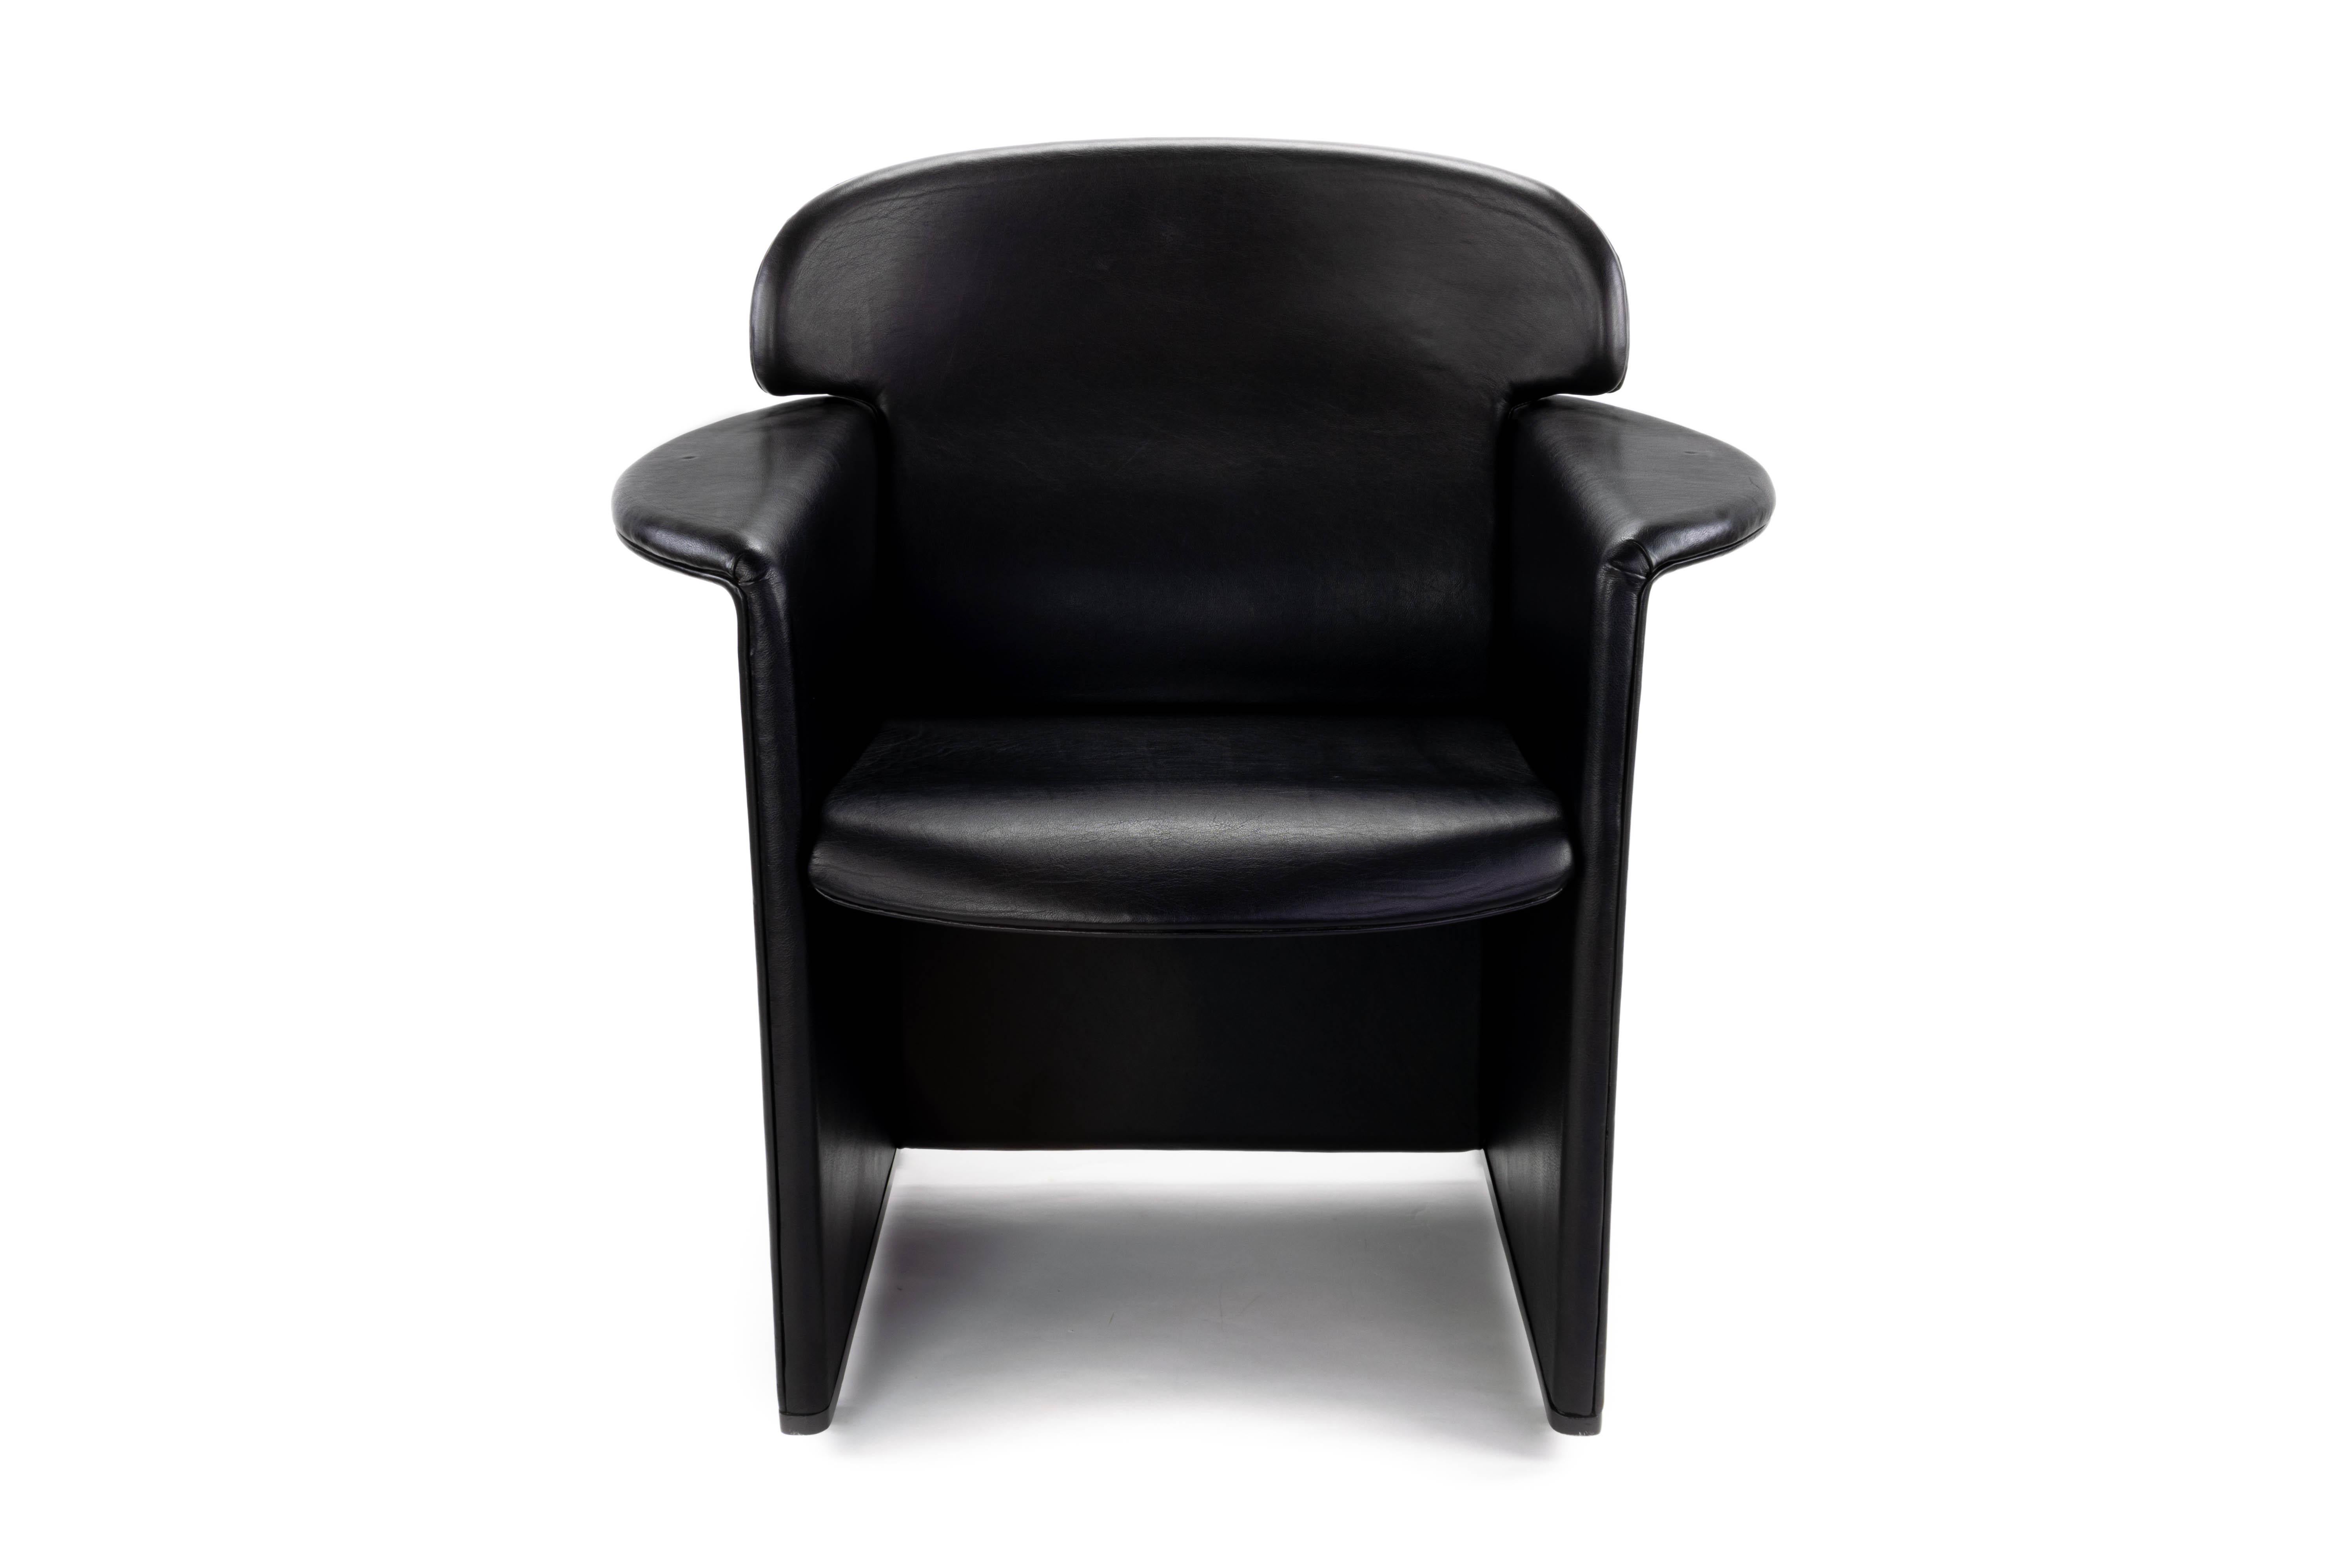 Armchair designed by Afra & Tobia Scarpa for B&B Italia. Upholstery in black leather in very good condition.
Measurements:
Height 84 cm
High Seat 46 cm
Width 79 cm
Depth 63 cm.